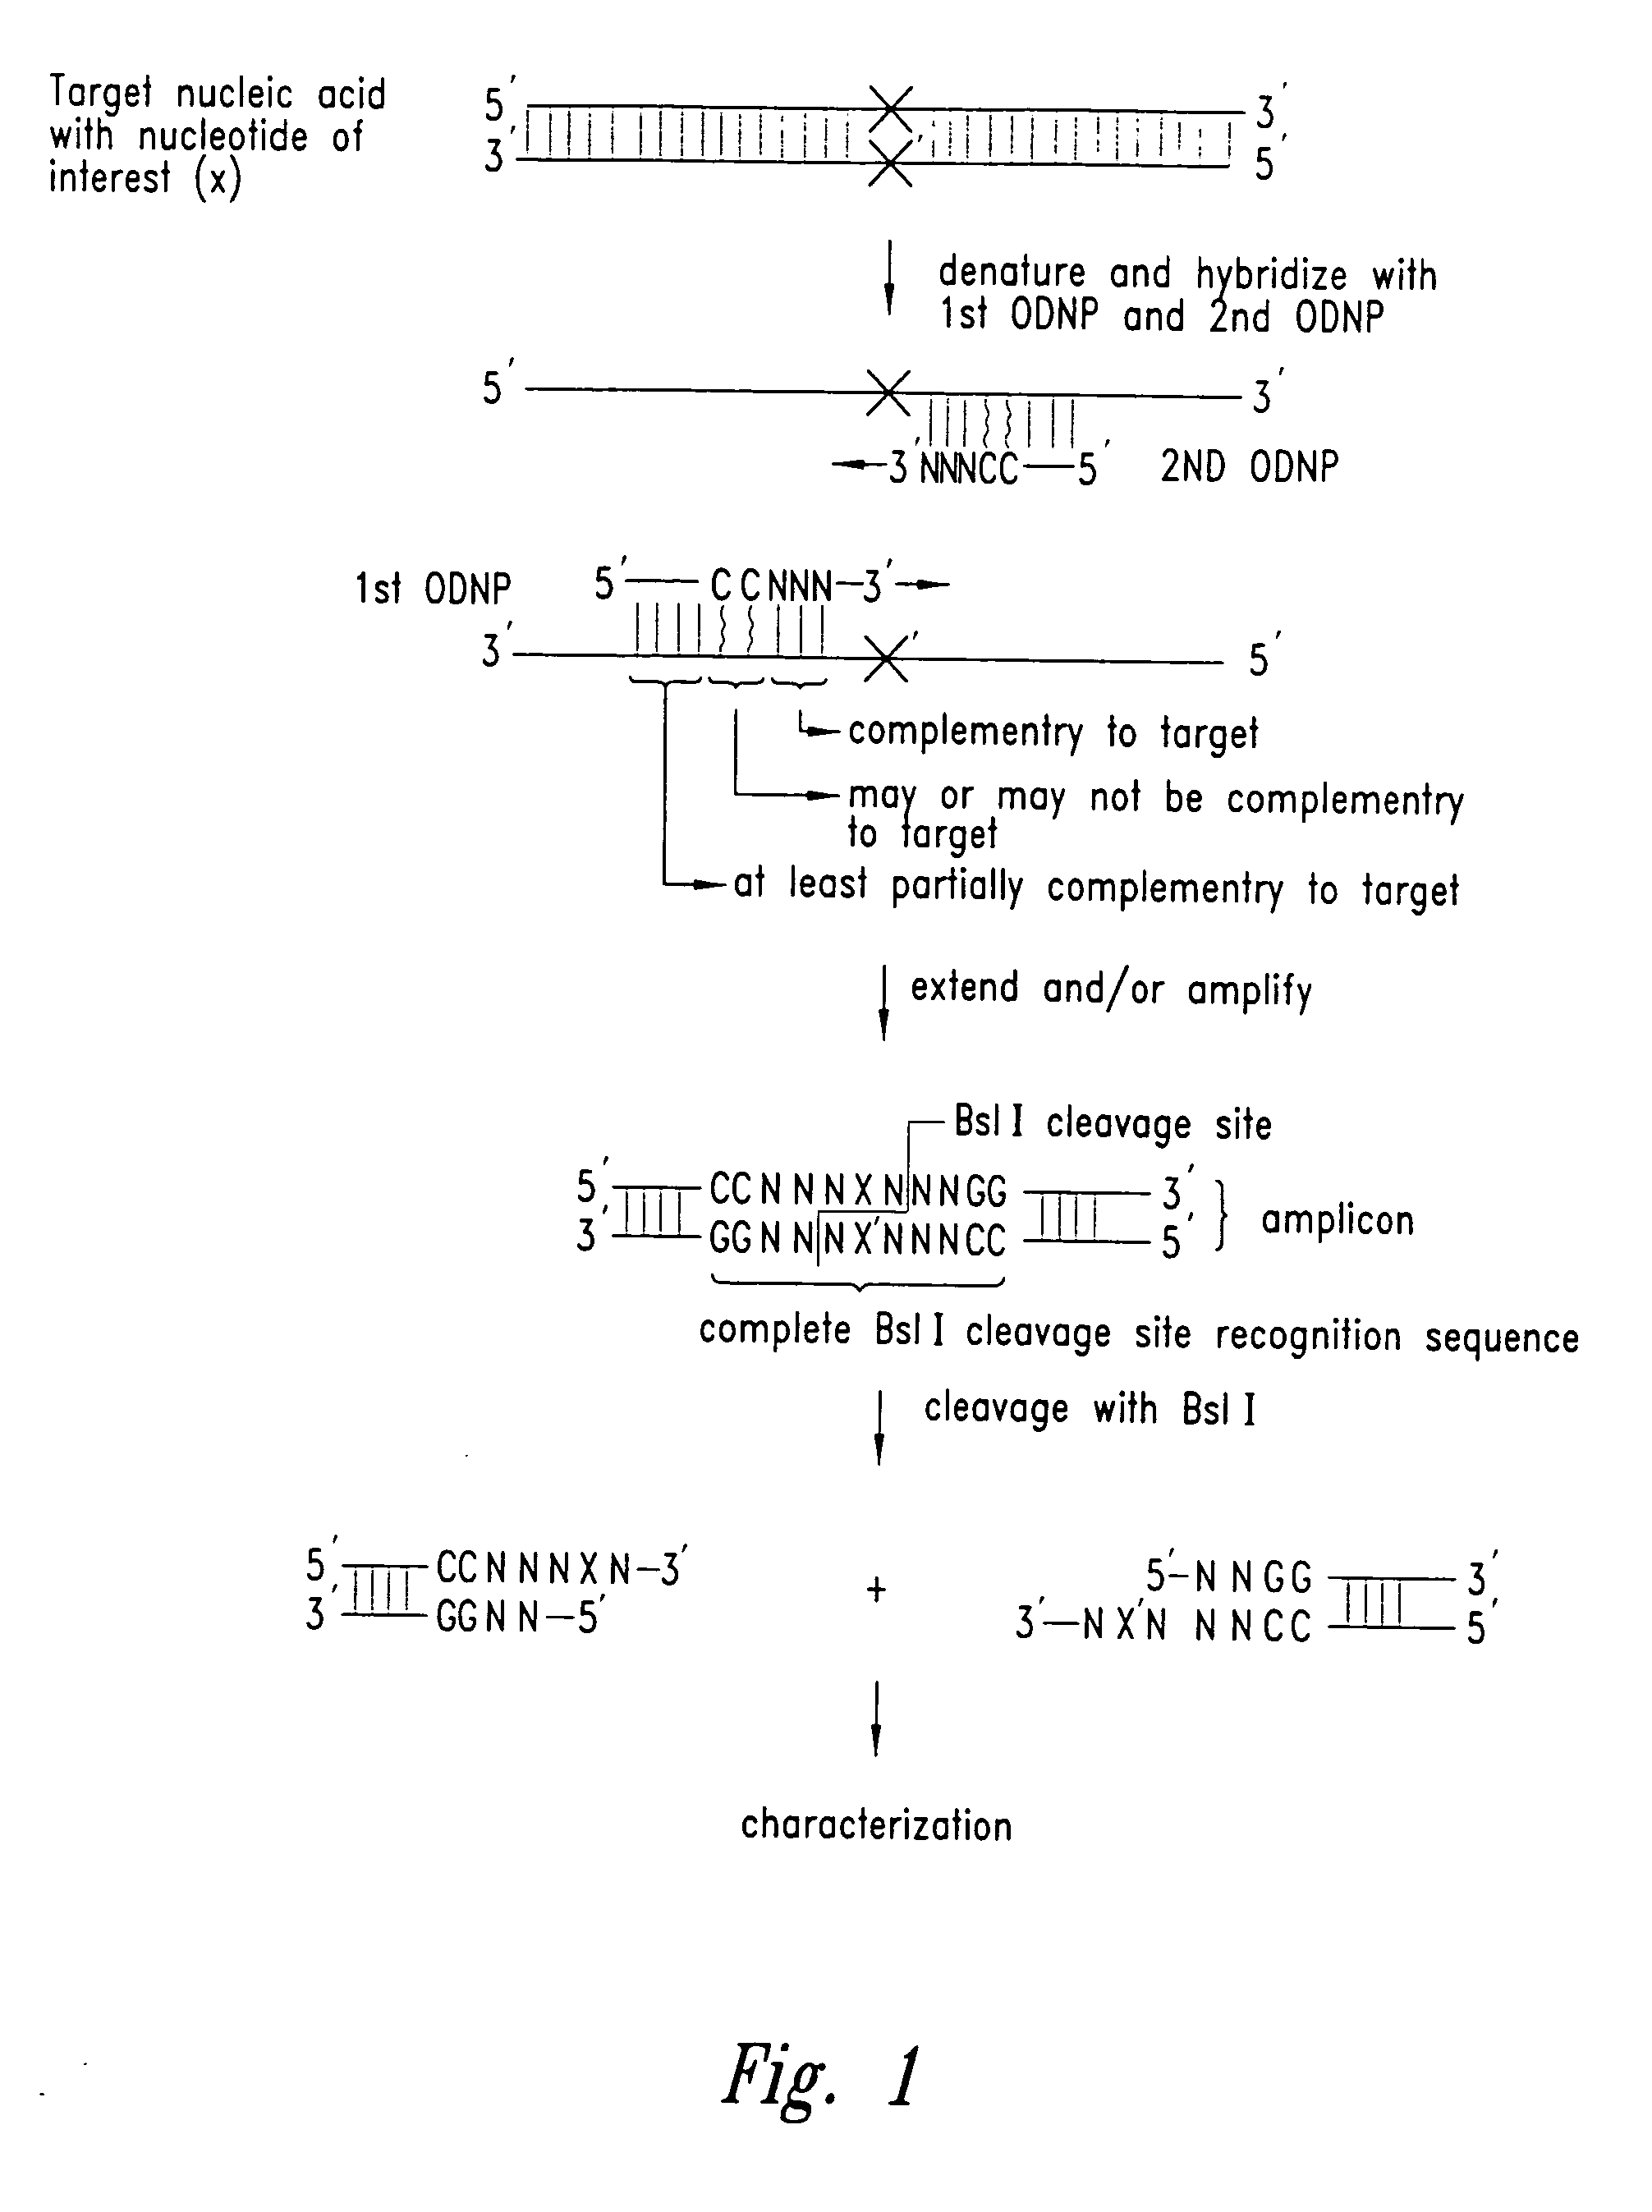 Methods for identifying nucleotides at defined positions in target nucleic acids